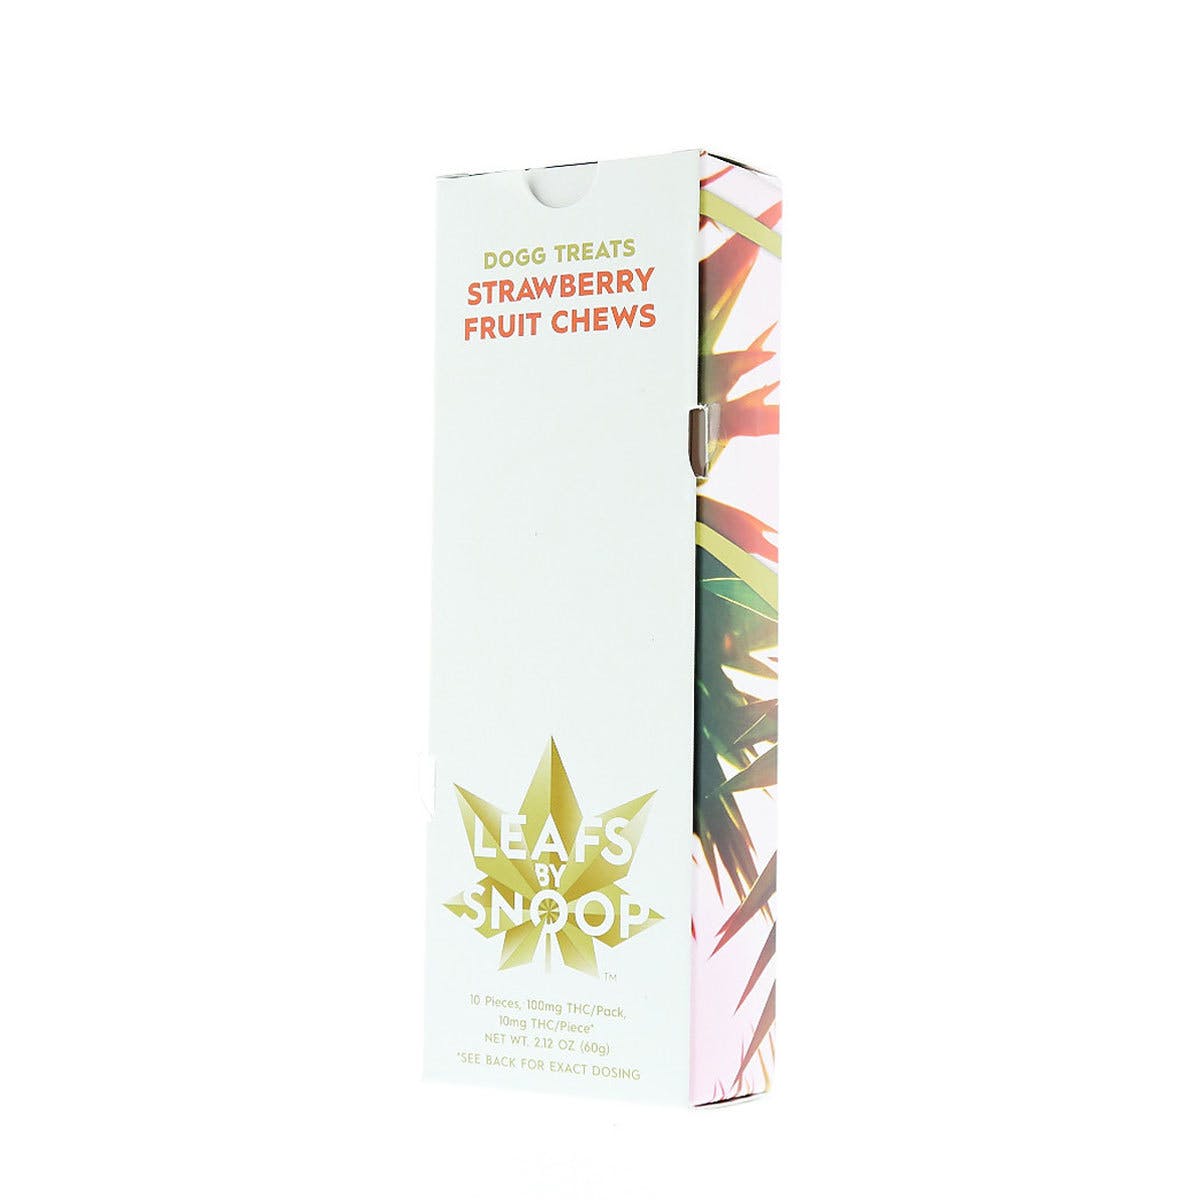 marijuana-dispensaries-rocky-mountain-high-carbondale-in-carbondale-strawberry-fruit-chews-100mg